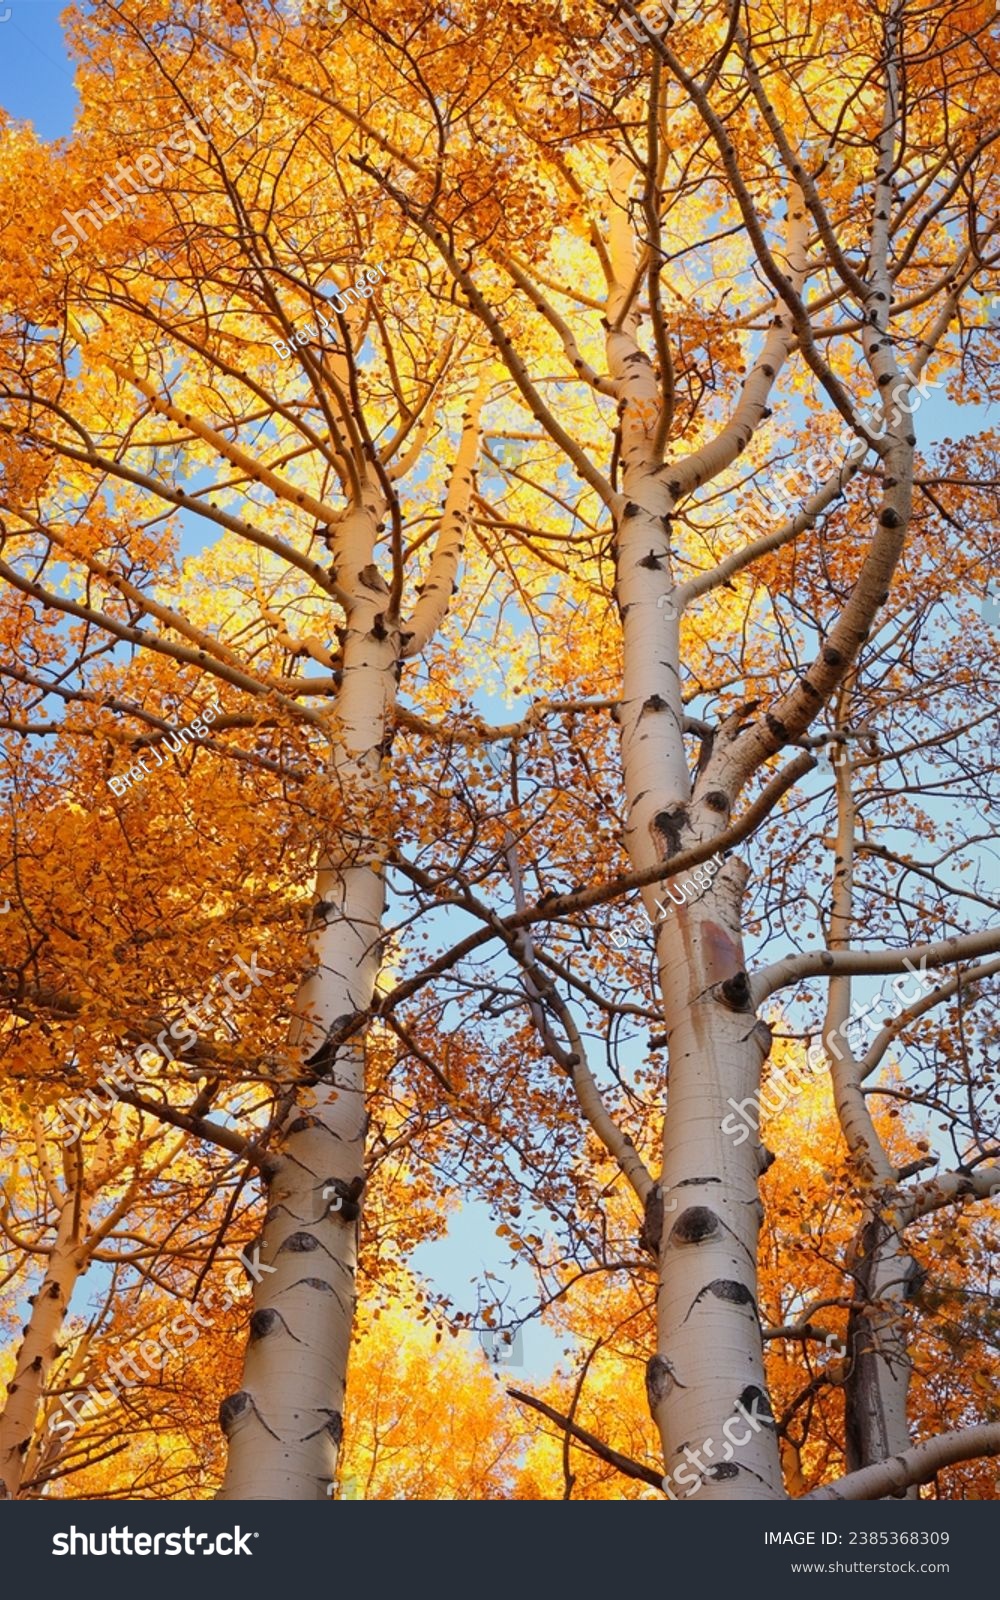 Abstract golden aspen tree scene in the Coconino National Forest #2385368309